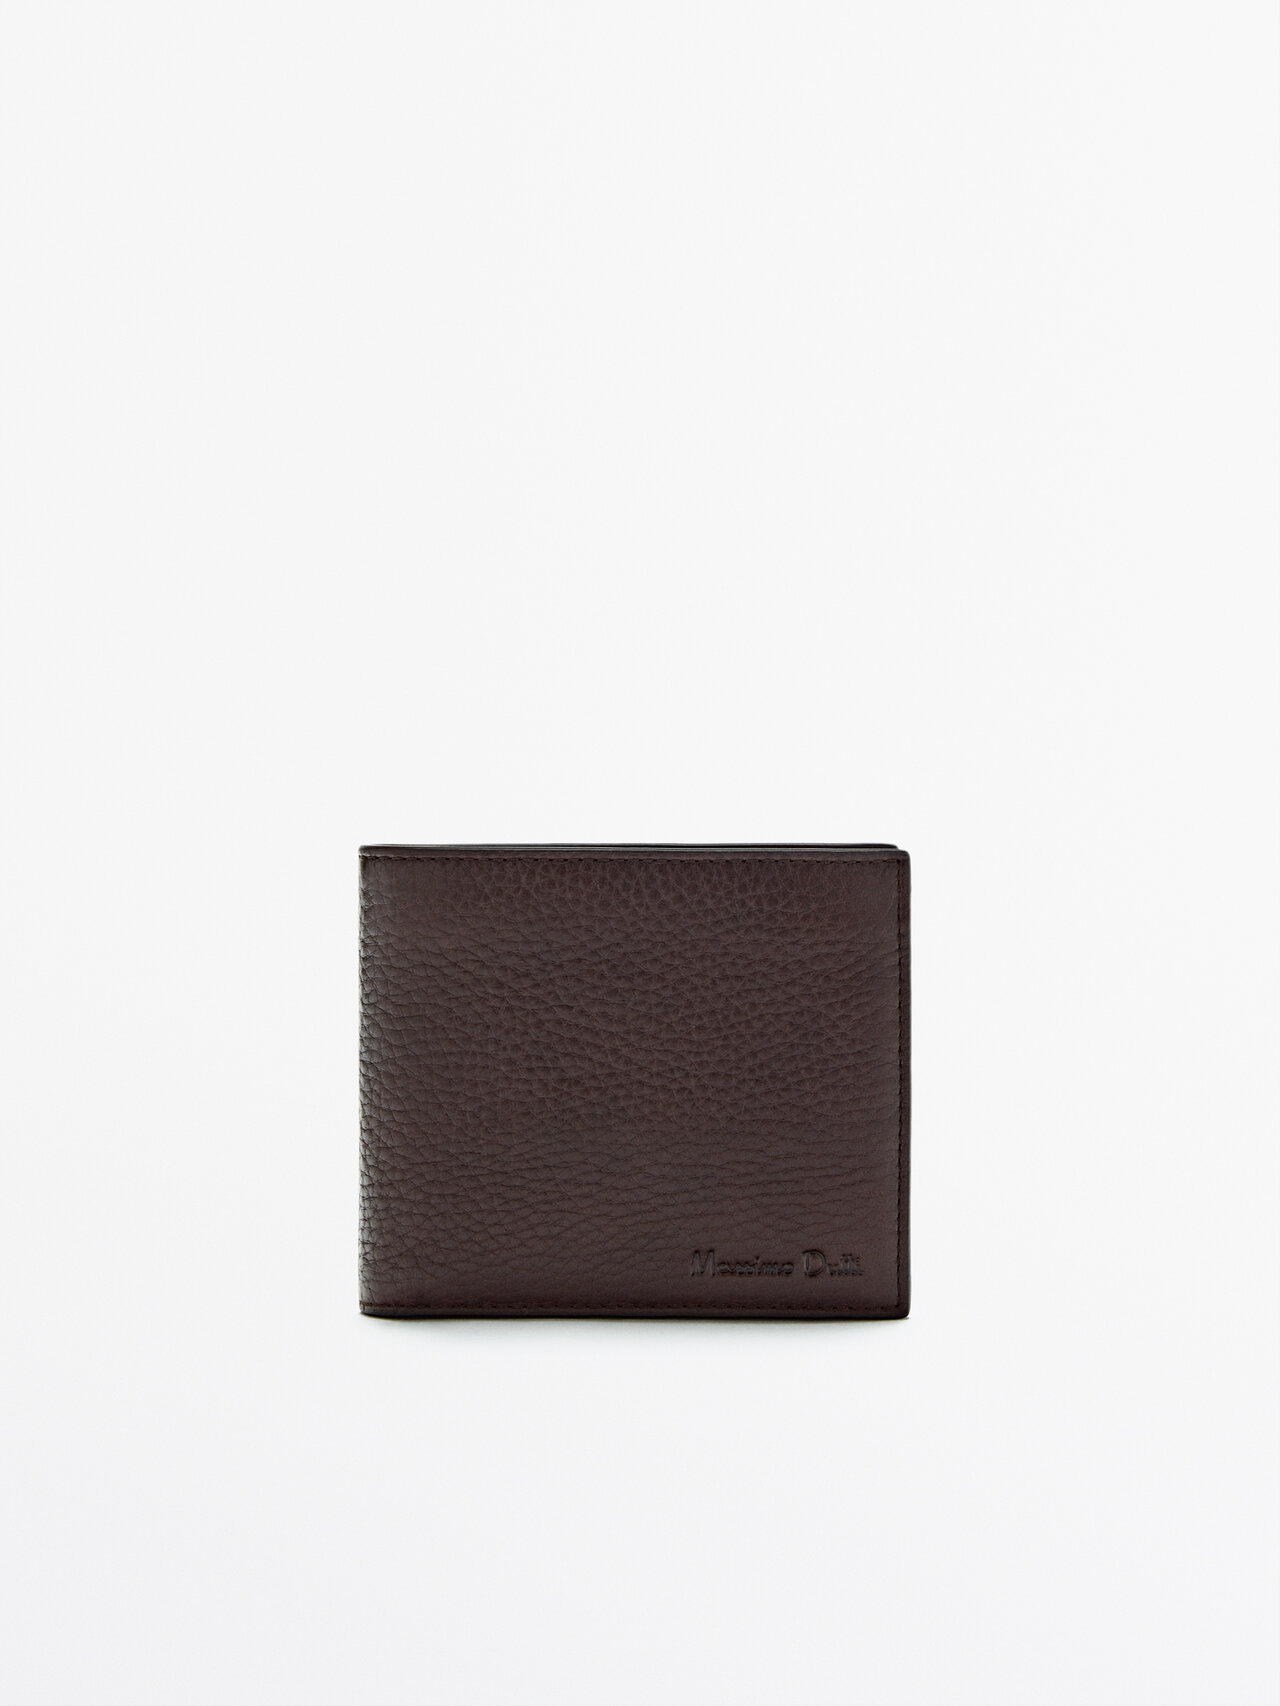 Massimo Dutti Leather Wallet In Brown